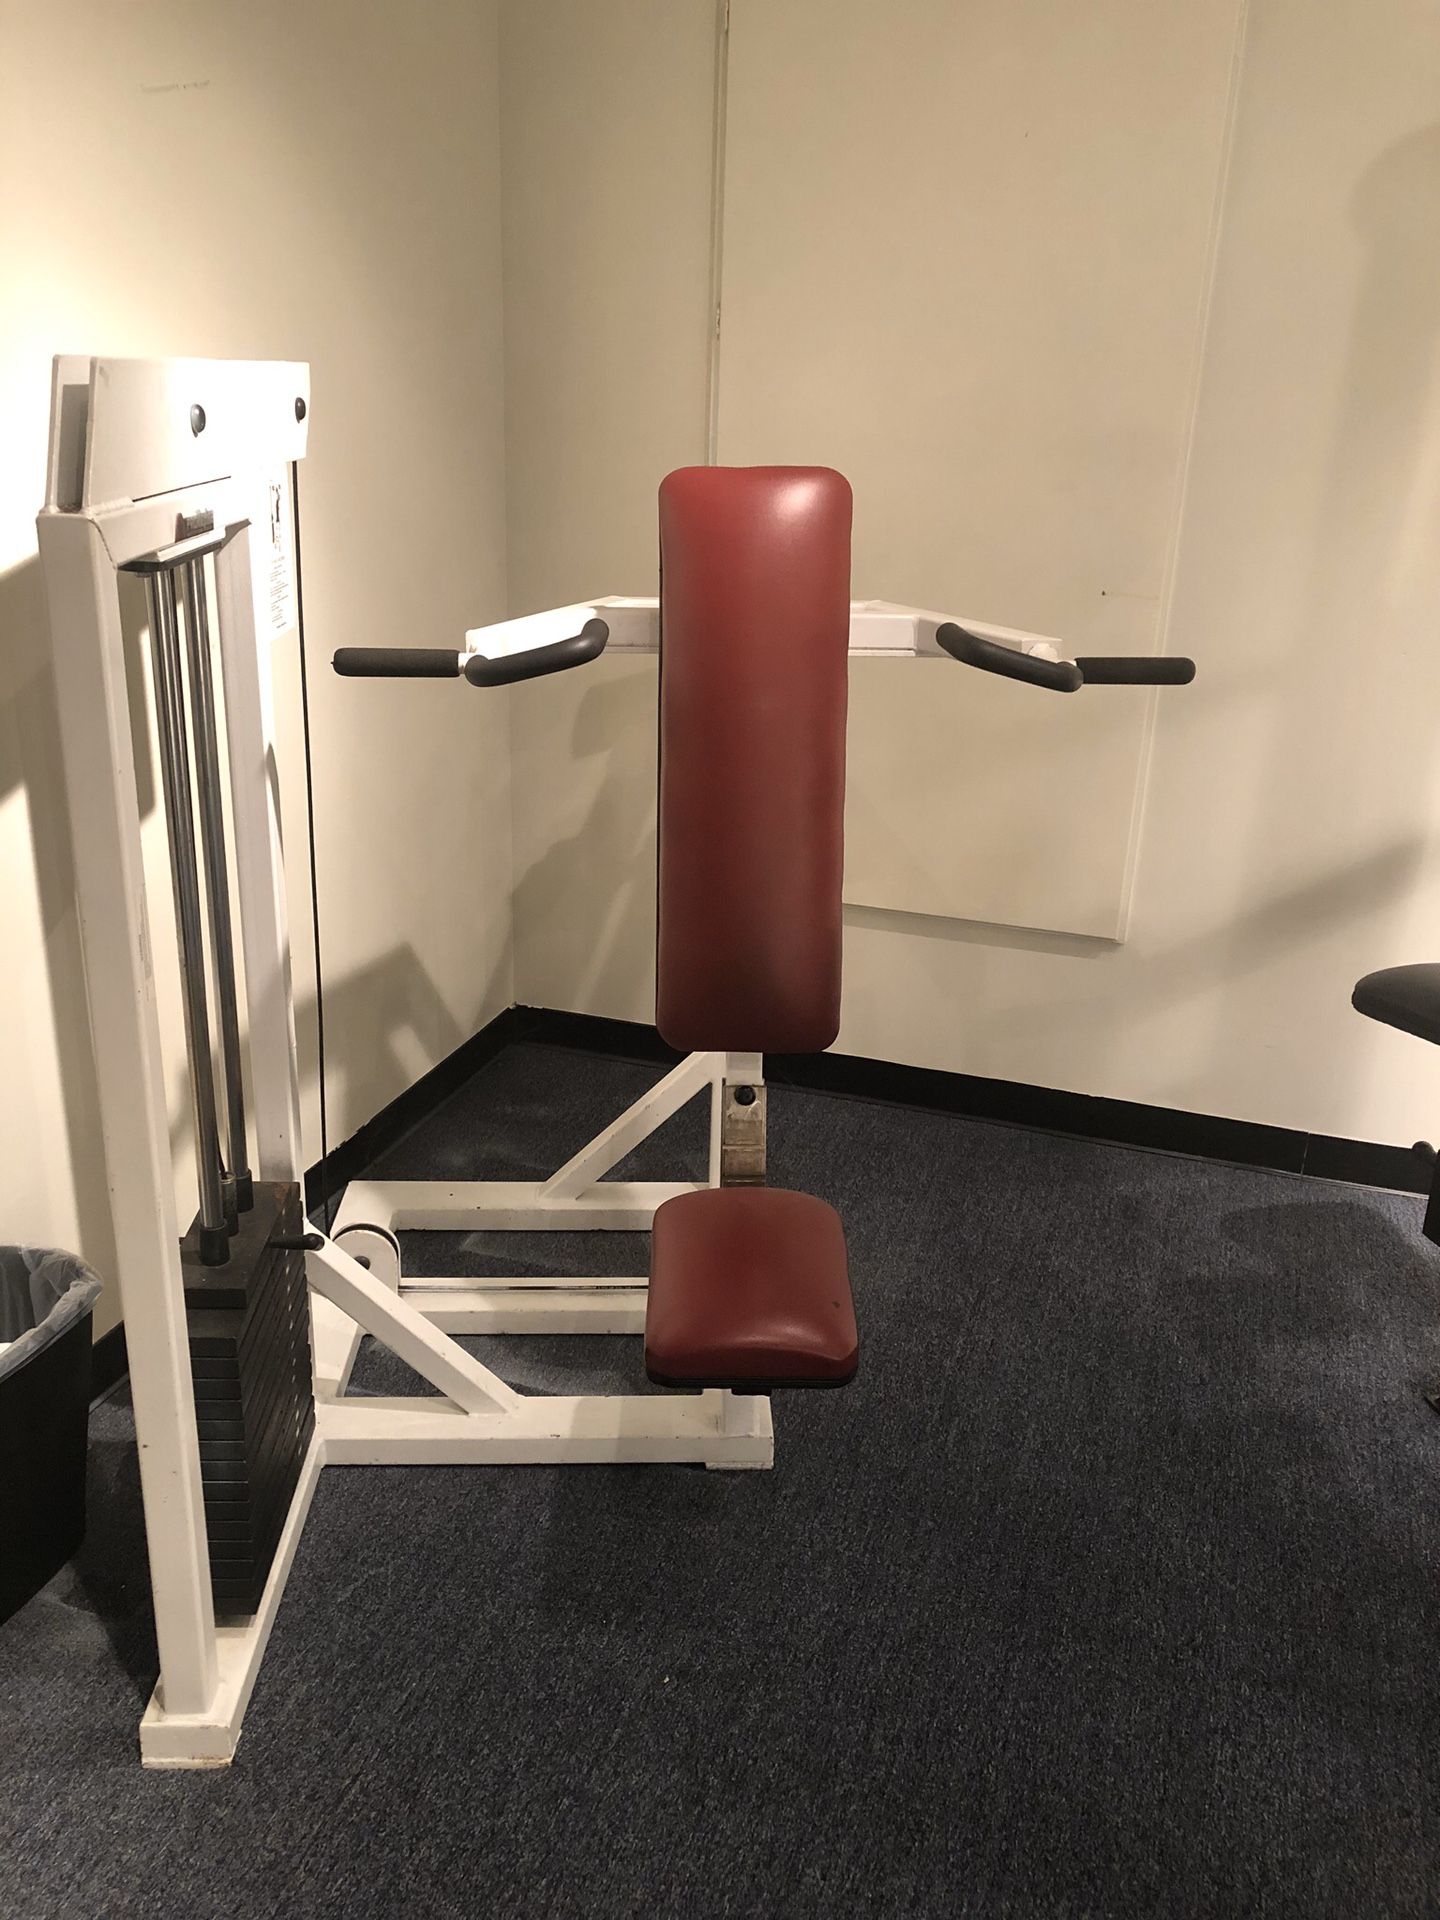 Exercise equipment and solid mohagany desk